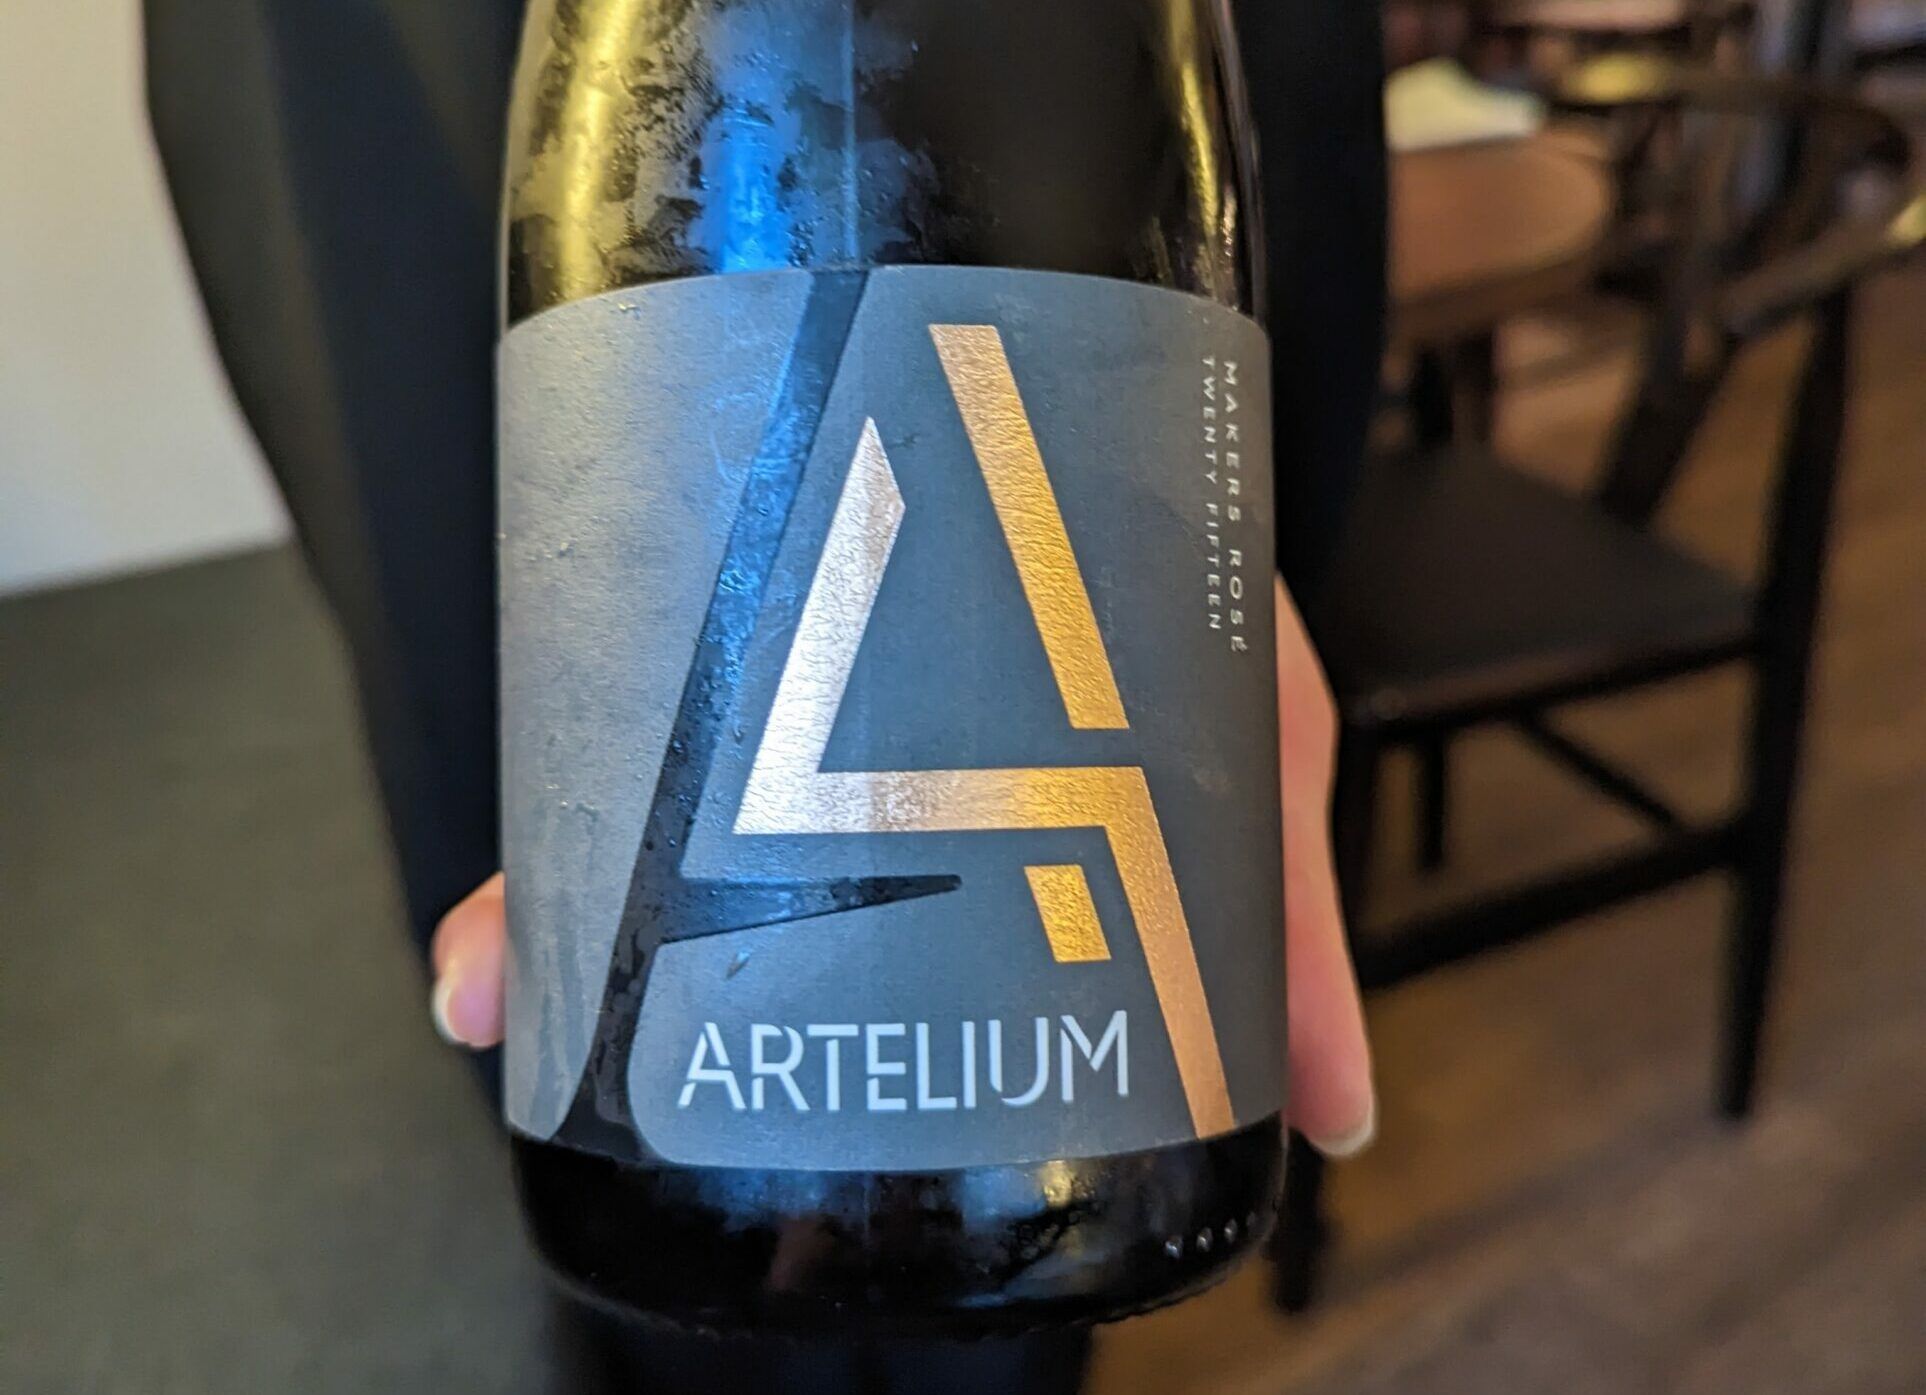 Person holding bottle of Atelium wine. A Voyage of Discovery: Hidden Treasure at Dilsk